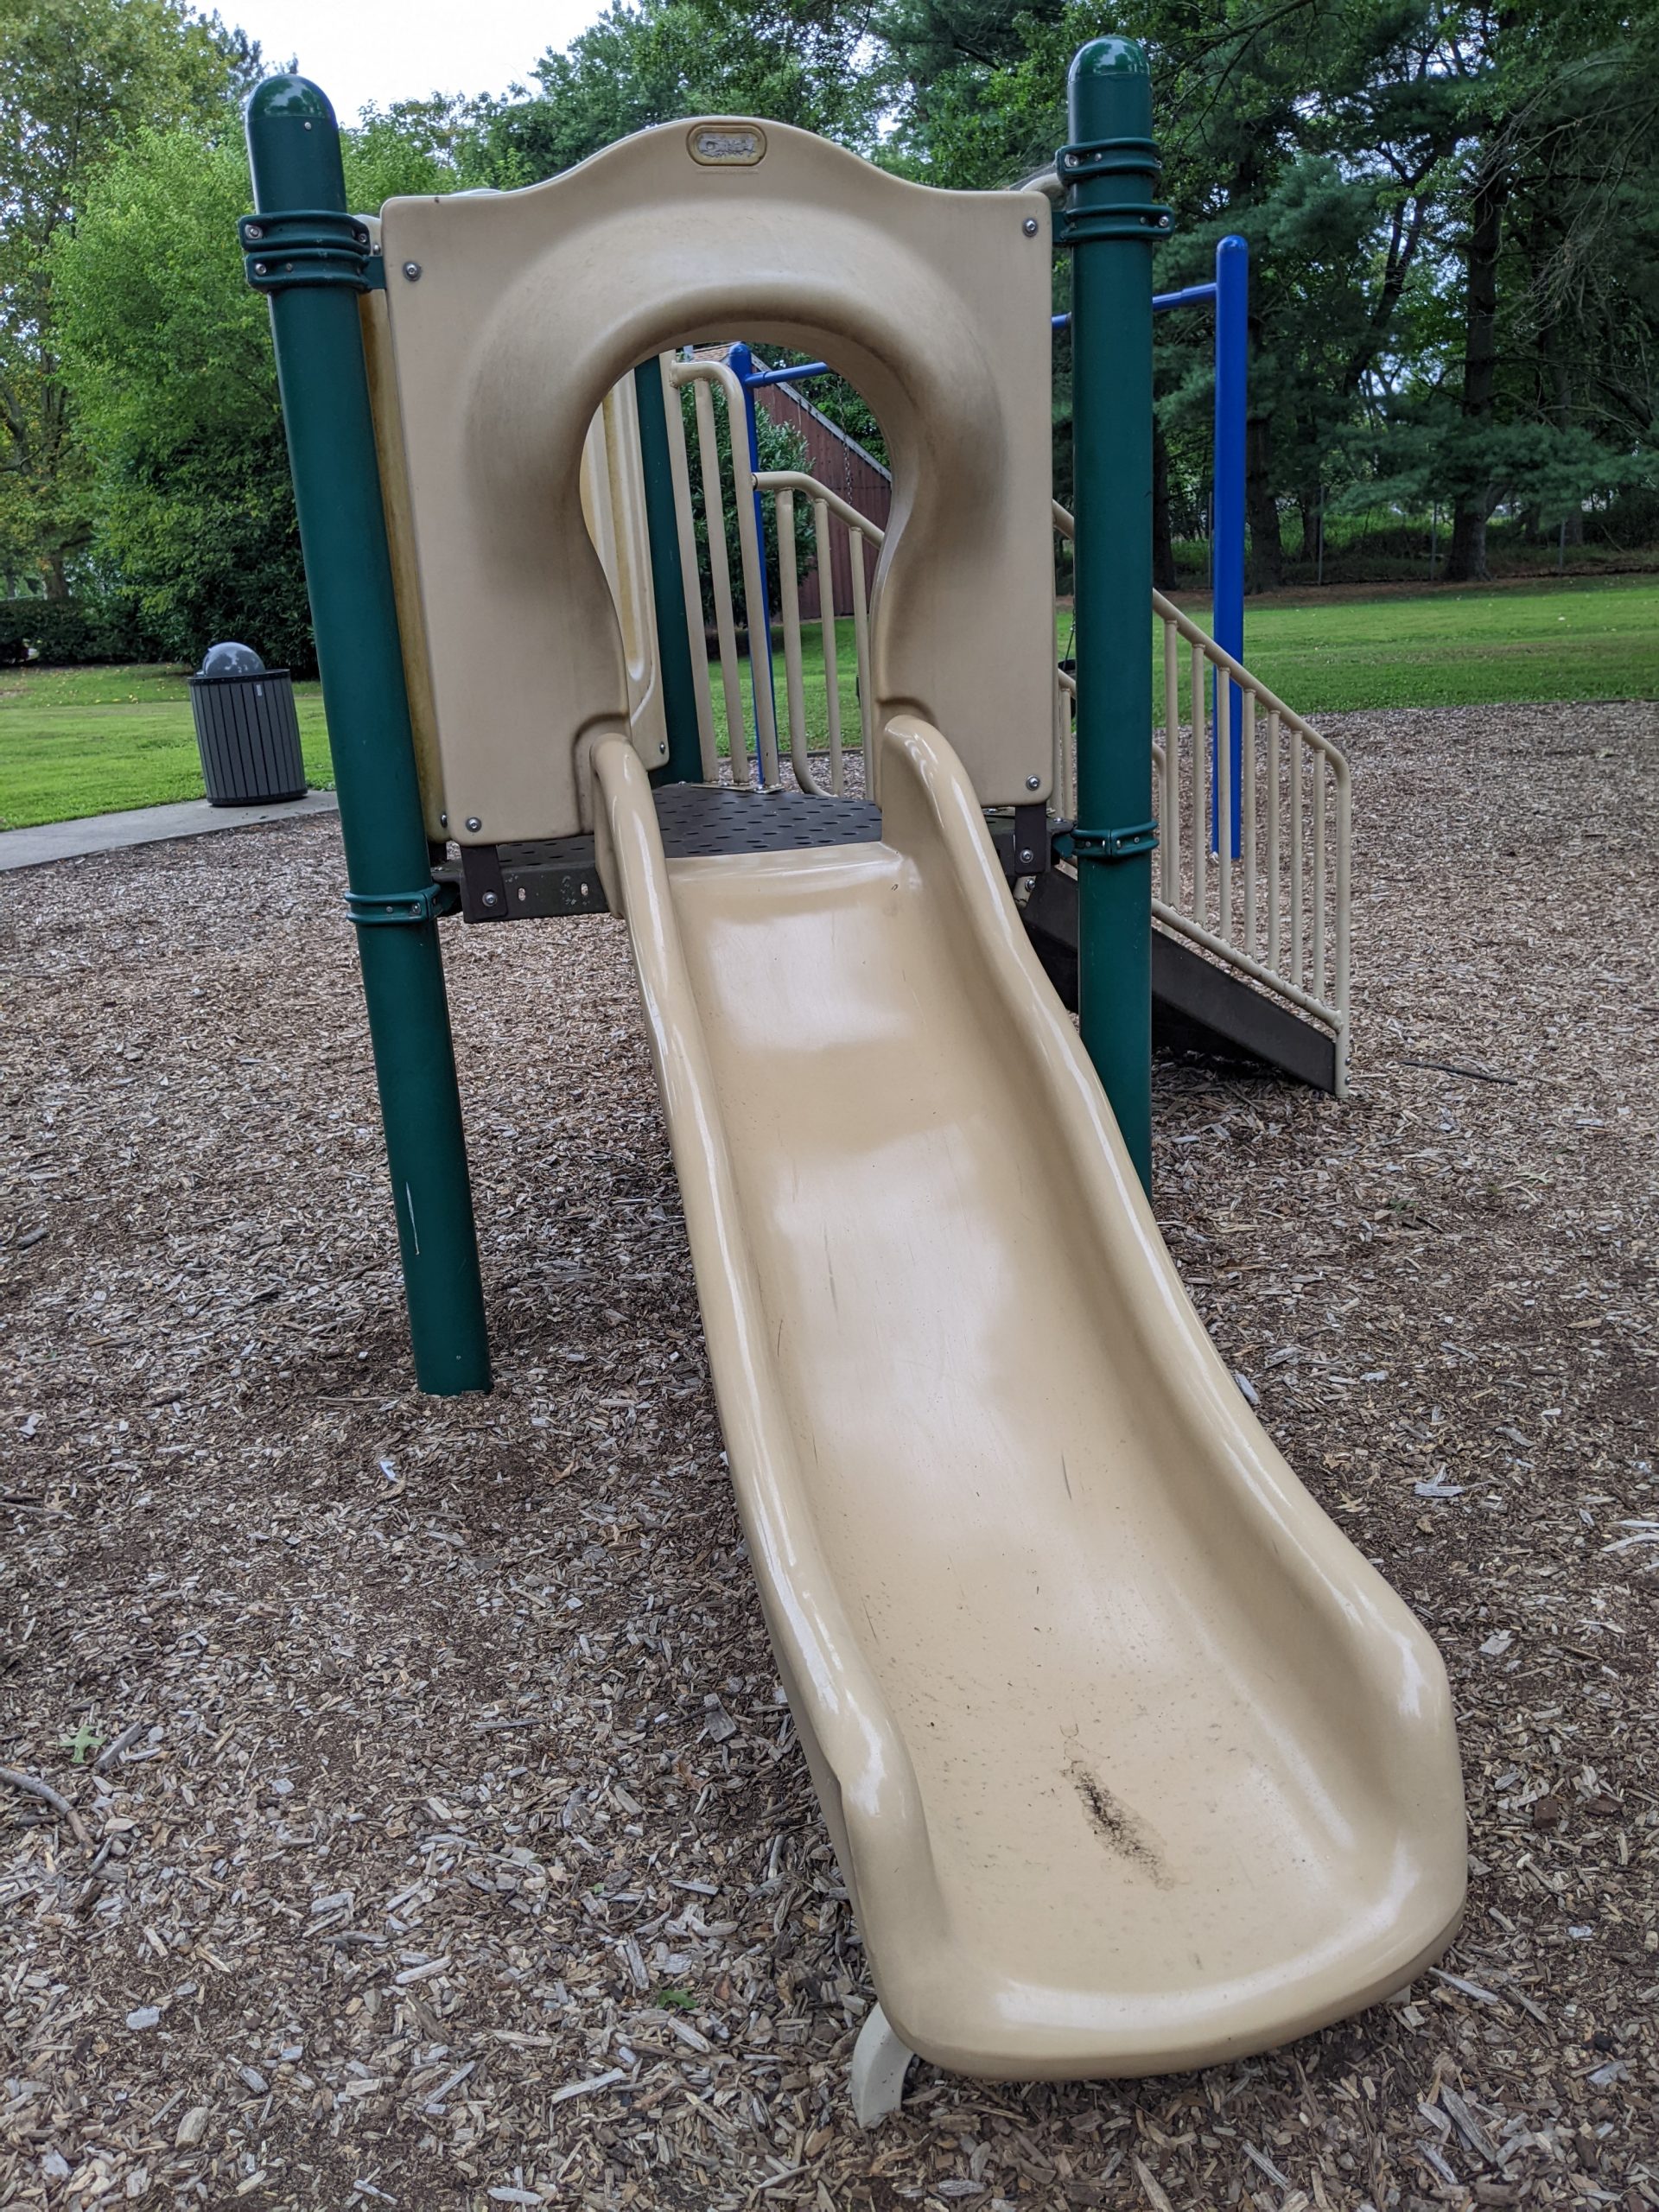 SLIDE - straight slide tall tan color At Red Bank Battlefield Park Playground in National Park NJ